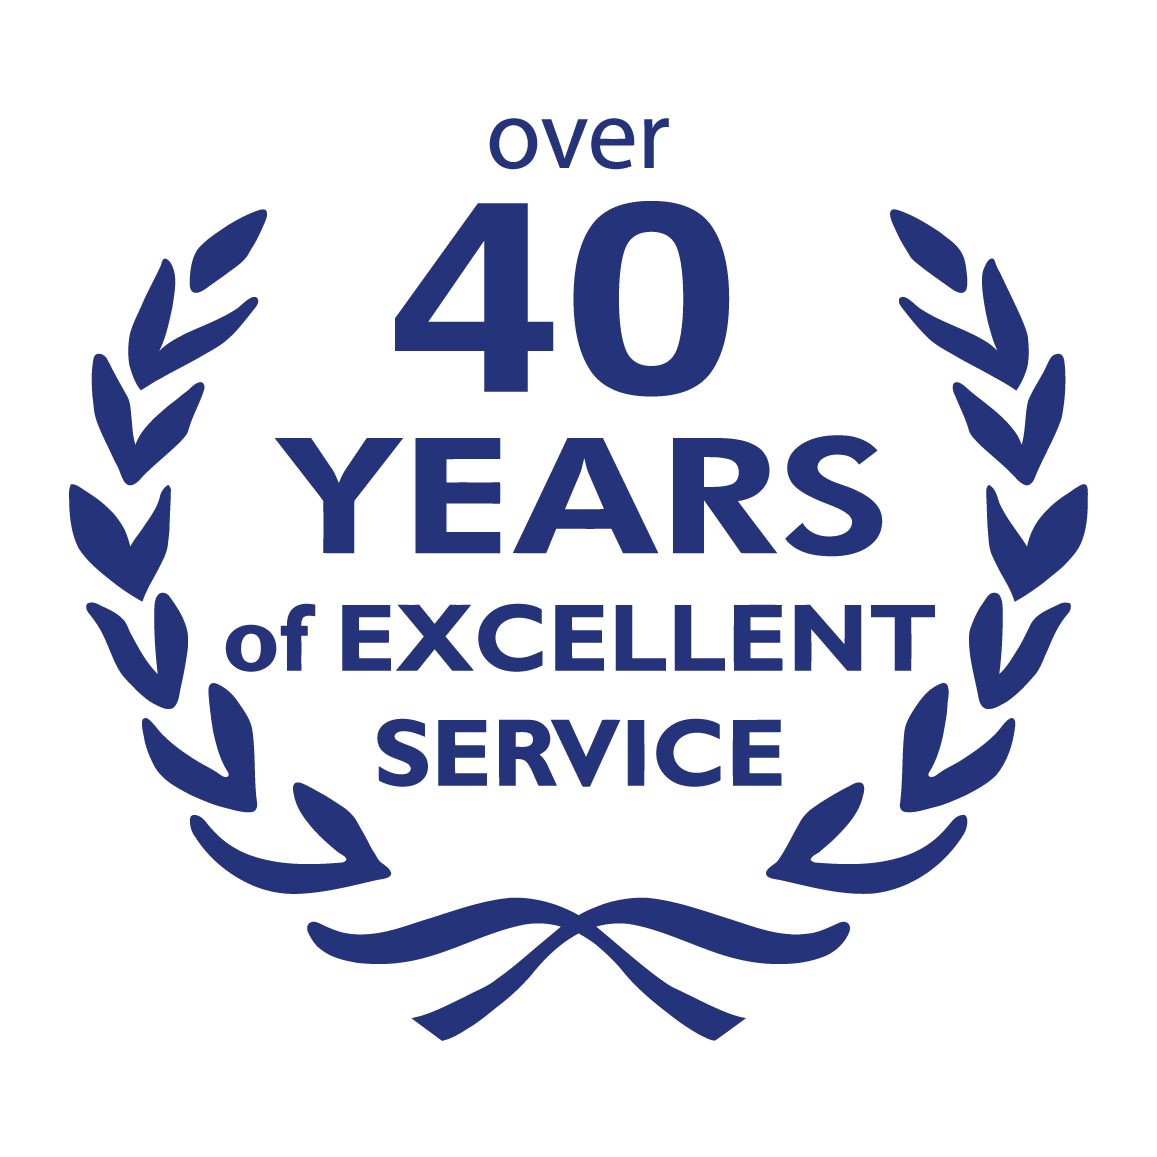 38 years of excellent service